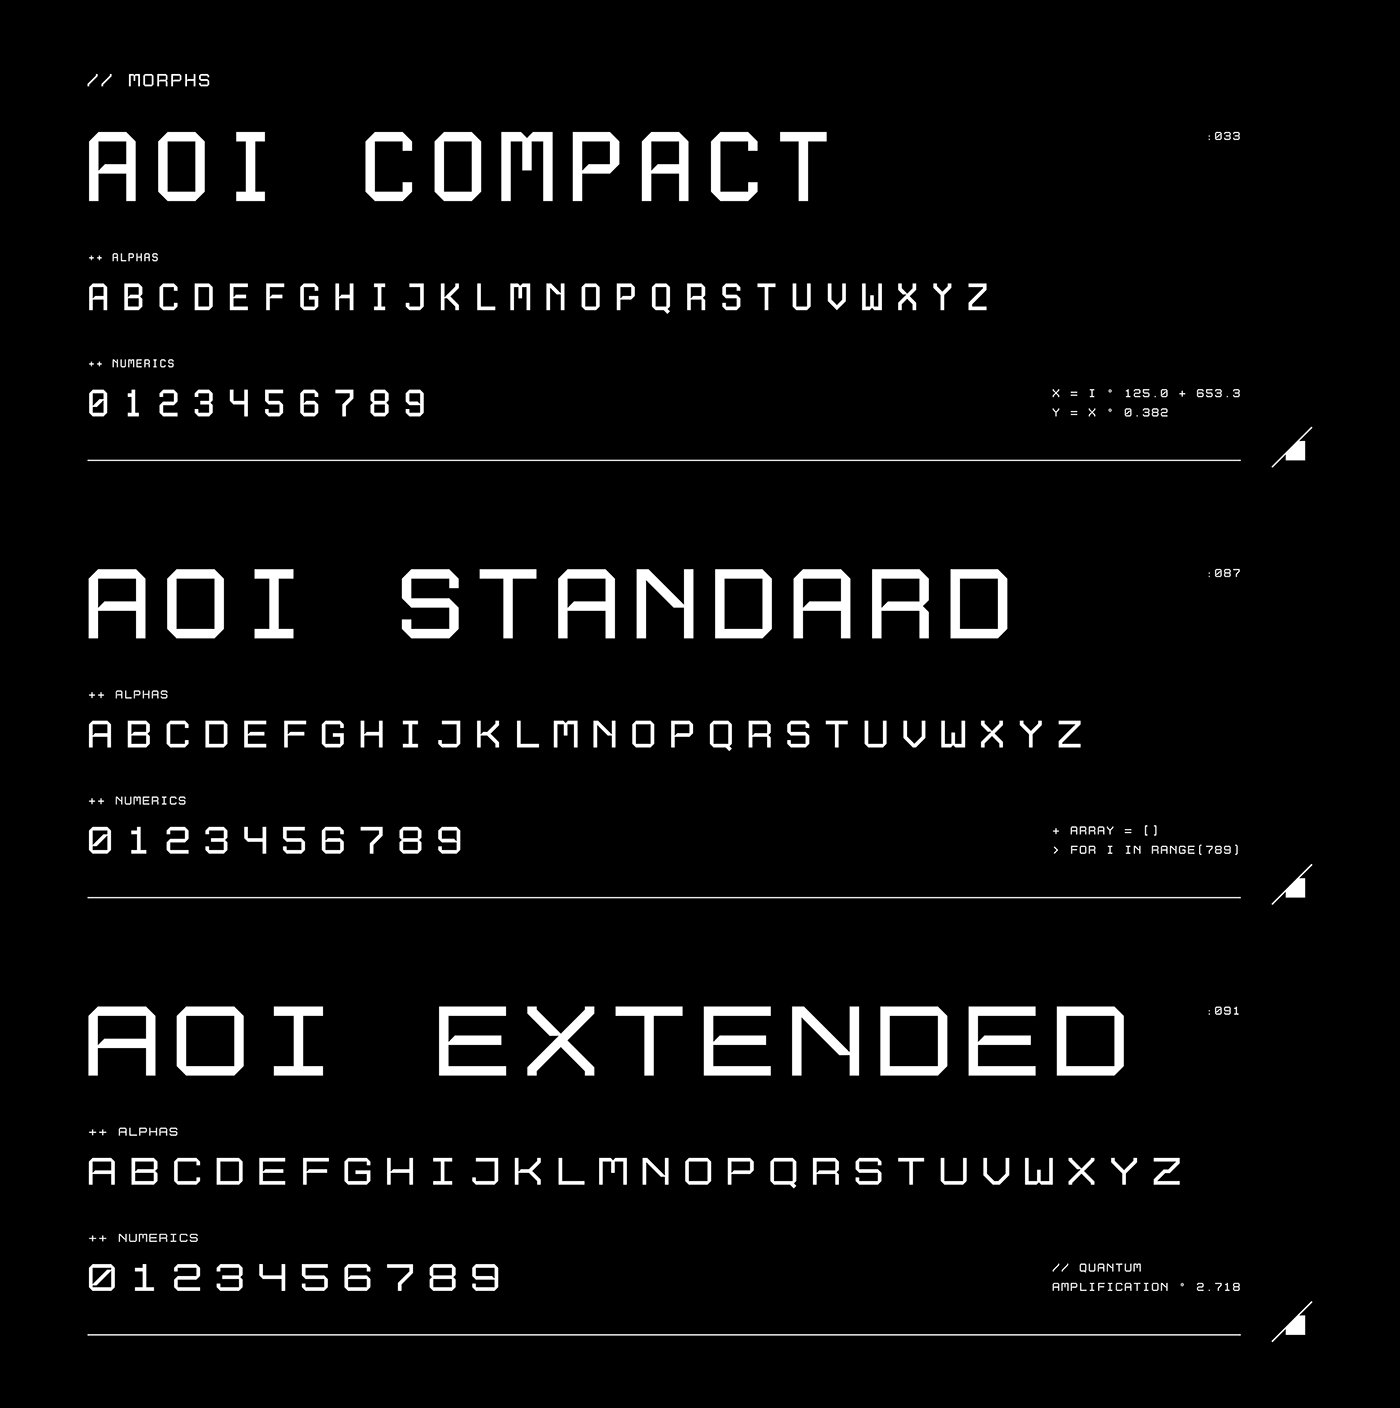 Typeface typography   Cyberpunk futuristic font modern Display typography design lettering type